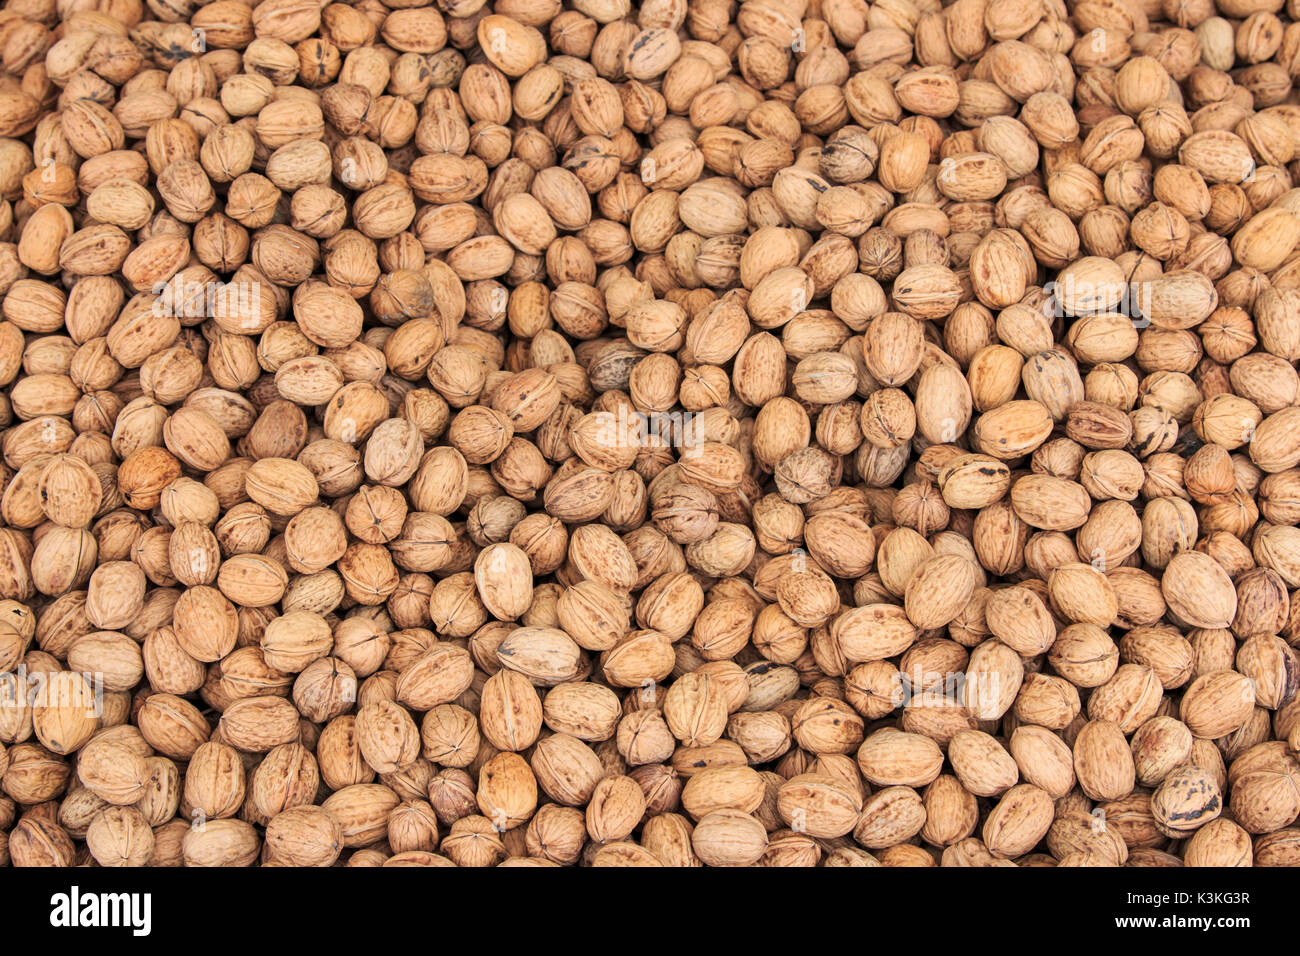 Close up of a group of Walnuts, Italy Stock Photo